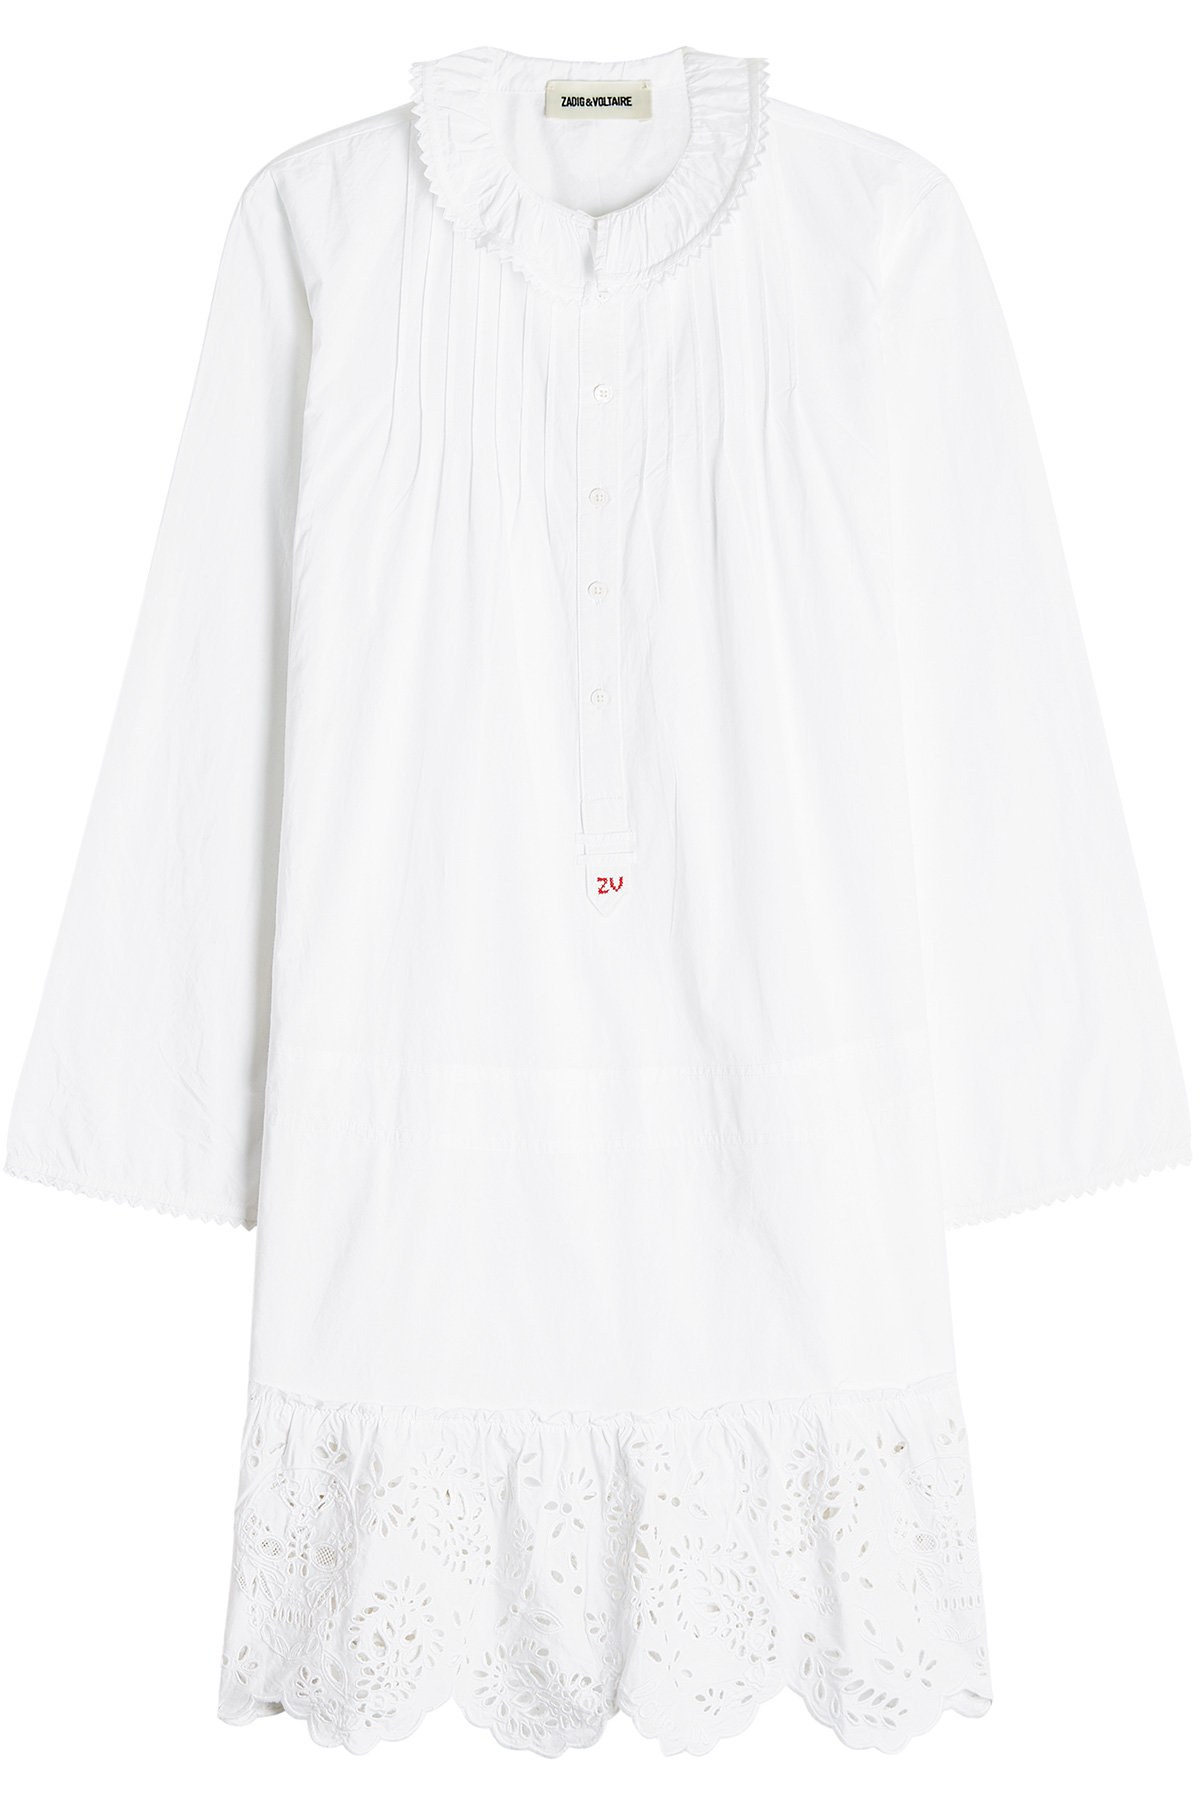 Zadig & Voltaire - Cotton Dress with Broderie Anglaise